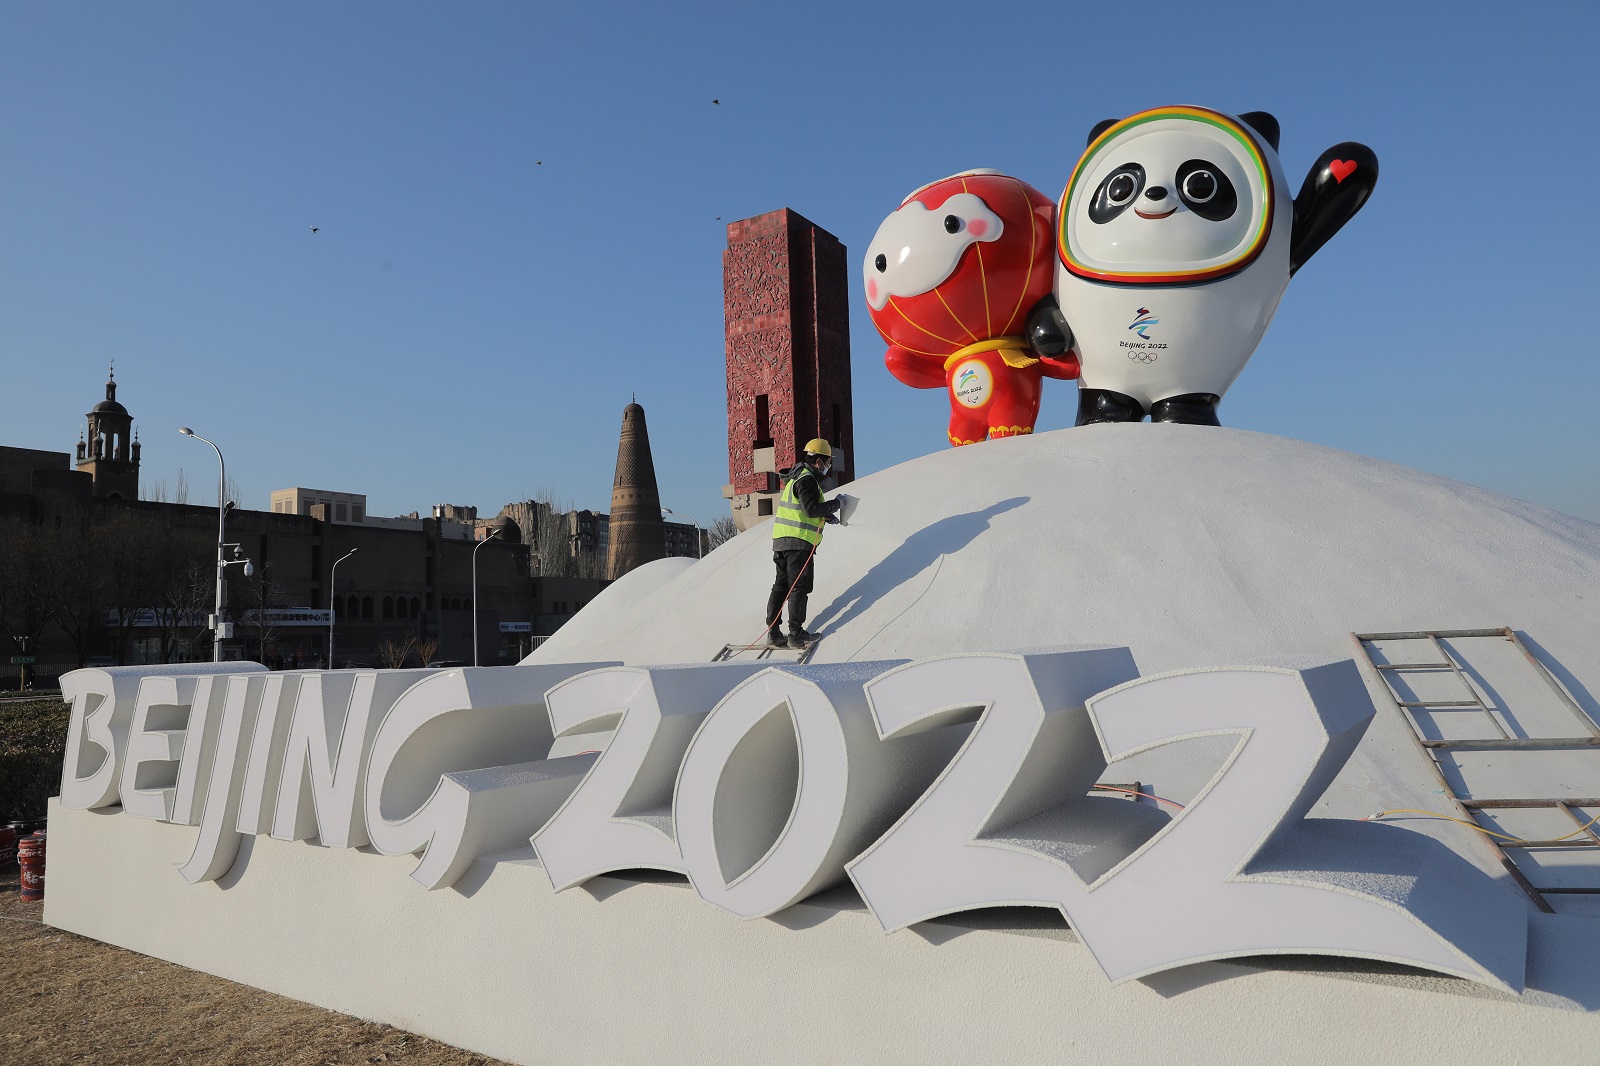 epa09678219 A Chinese worker sprays paint near the Bing Dwen Dwen, the Beijing 2022 Winter Olympic Mascot and Shuey Rhon Rhon, the 2022 Beijing Winter Paralympic Games Mascot, in Beijing, China, 11 January 2022. China is scheduled to host the Beijing 2022 Olympic and Paralympic Winter Games in February, making its capital the first city in the world to host both Summer (2008) and Winter Olympics (2022).  EPA/WU HONG